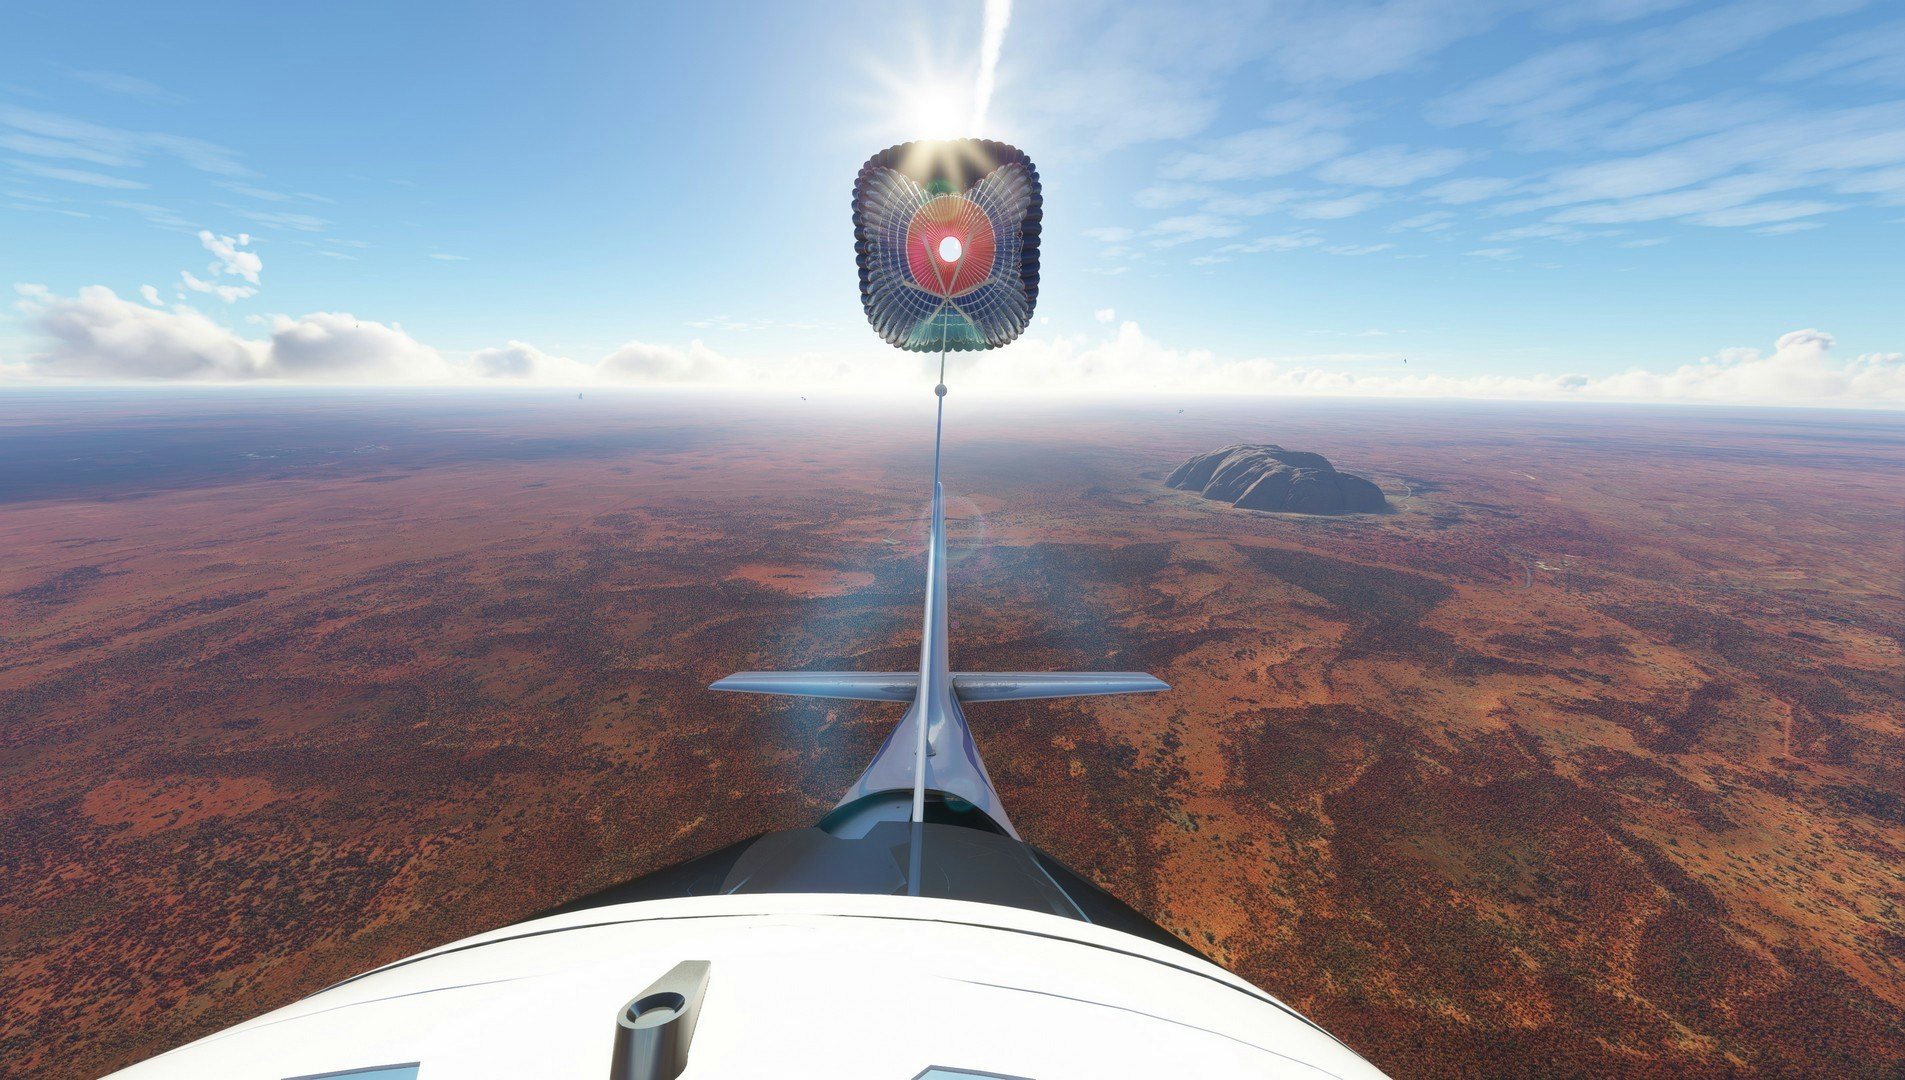 FSReborn Announces Sting S4 for Microsoft Flight Simulator; Comes with Full BRS